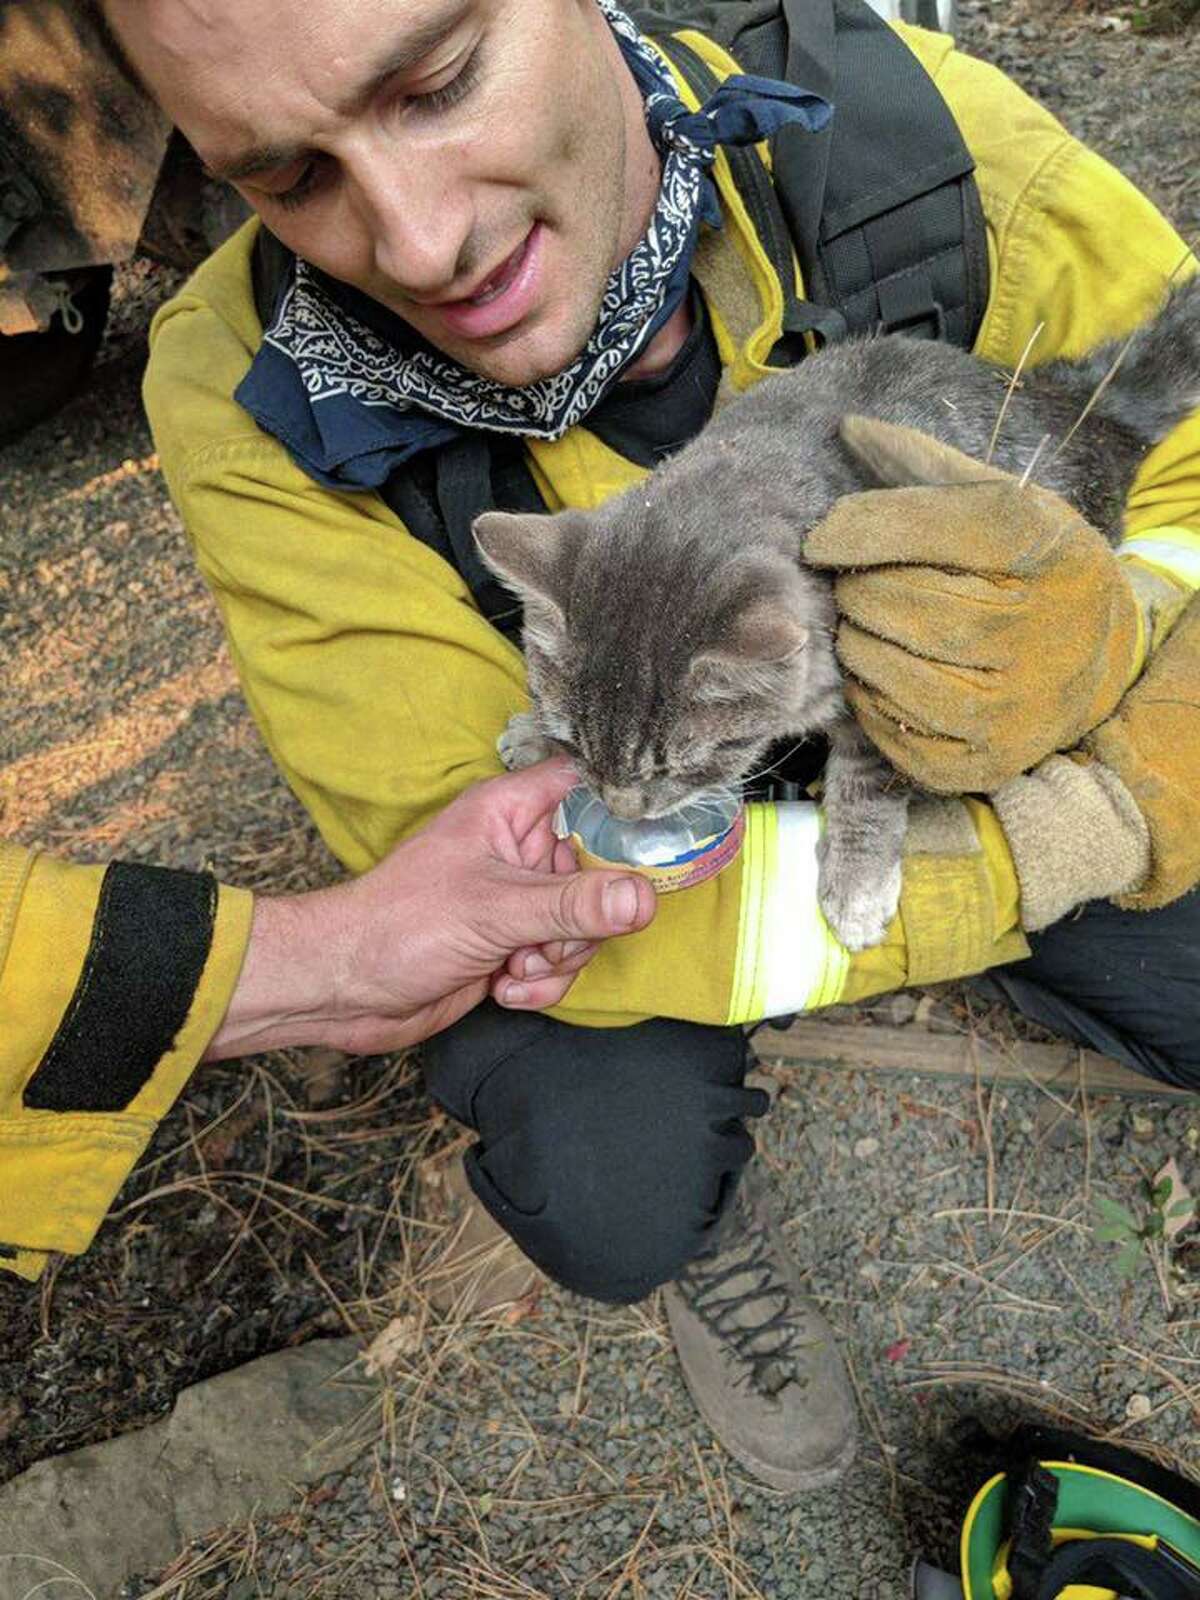 Firefighters from the Foster City Fire Department who were sent to Butte County to battle the Camp Fire rescued an injured cat.